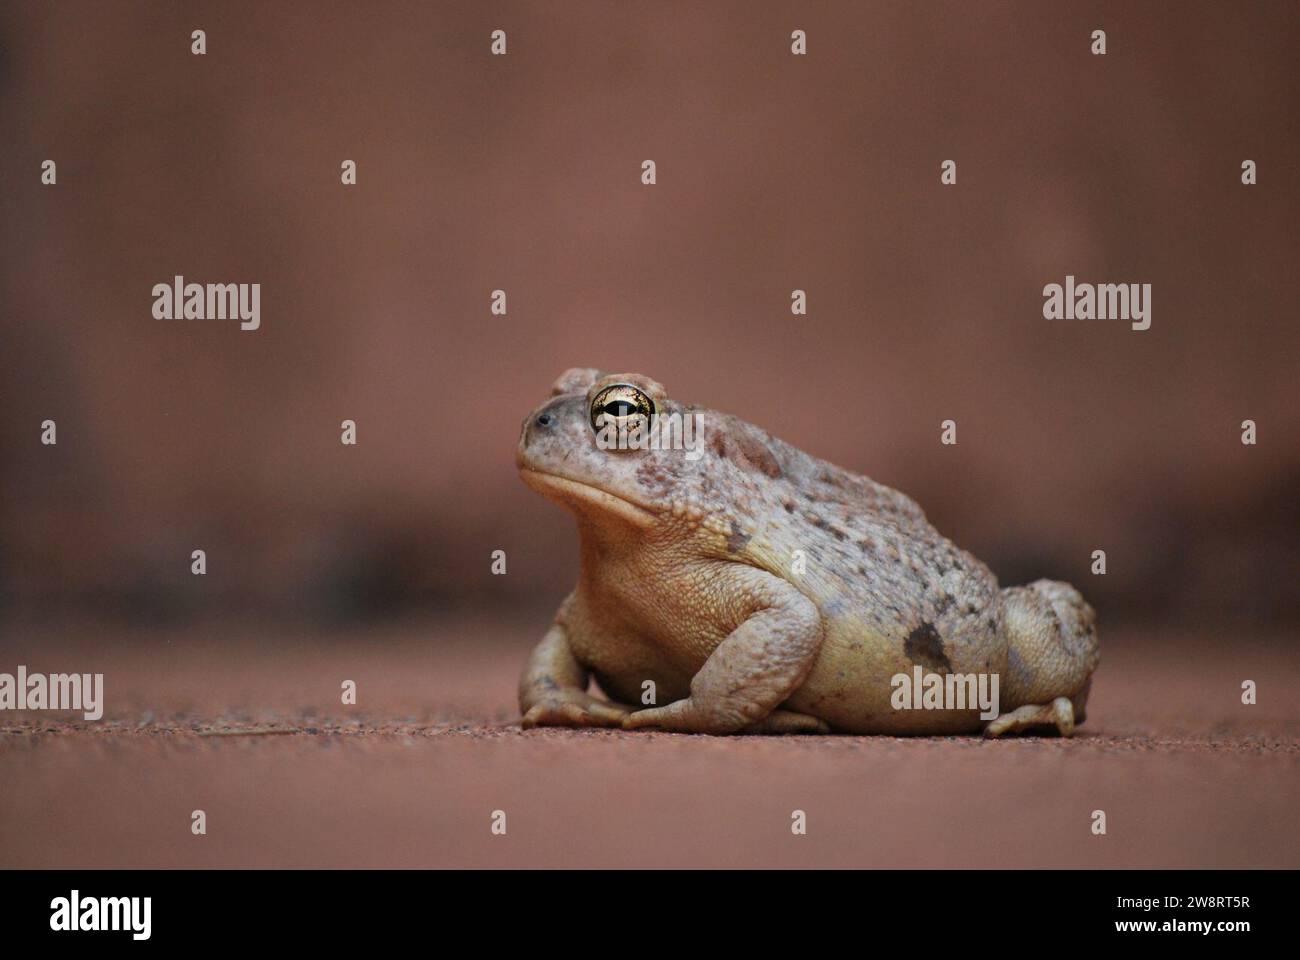 Woodhouses Toad Bufo woodhousii Zion National Park photo. Banque D'Images